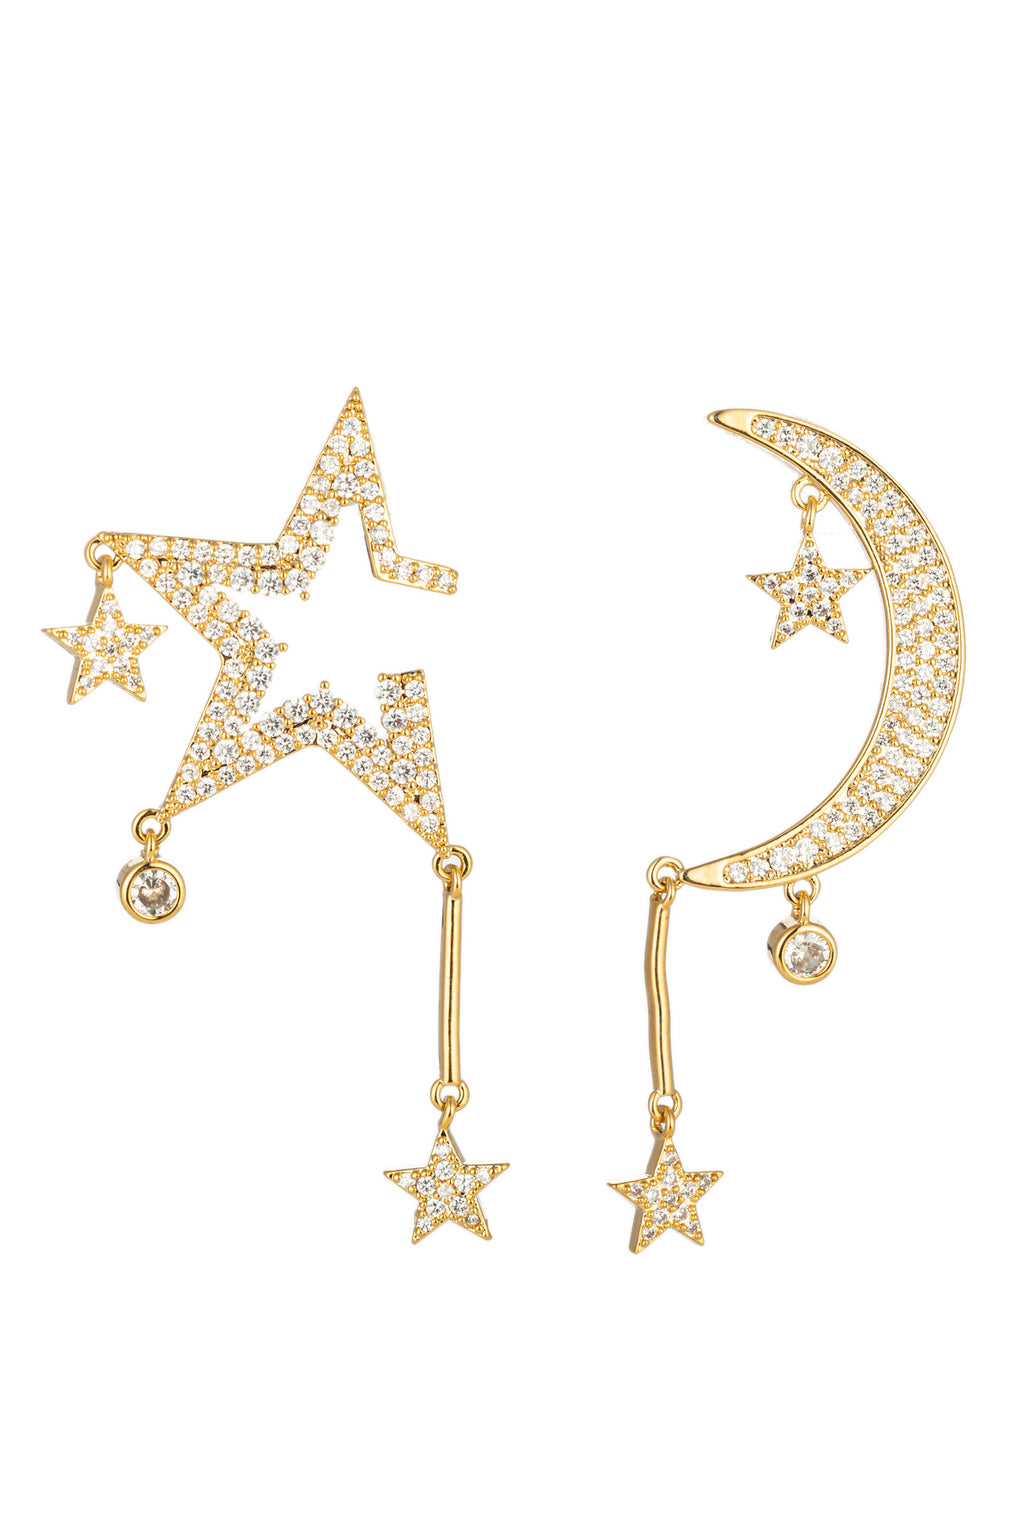 Star and crescent moon earrings studded with CZ crystals.